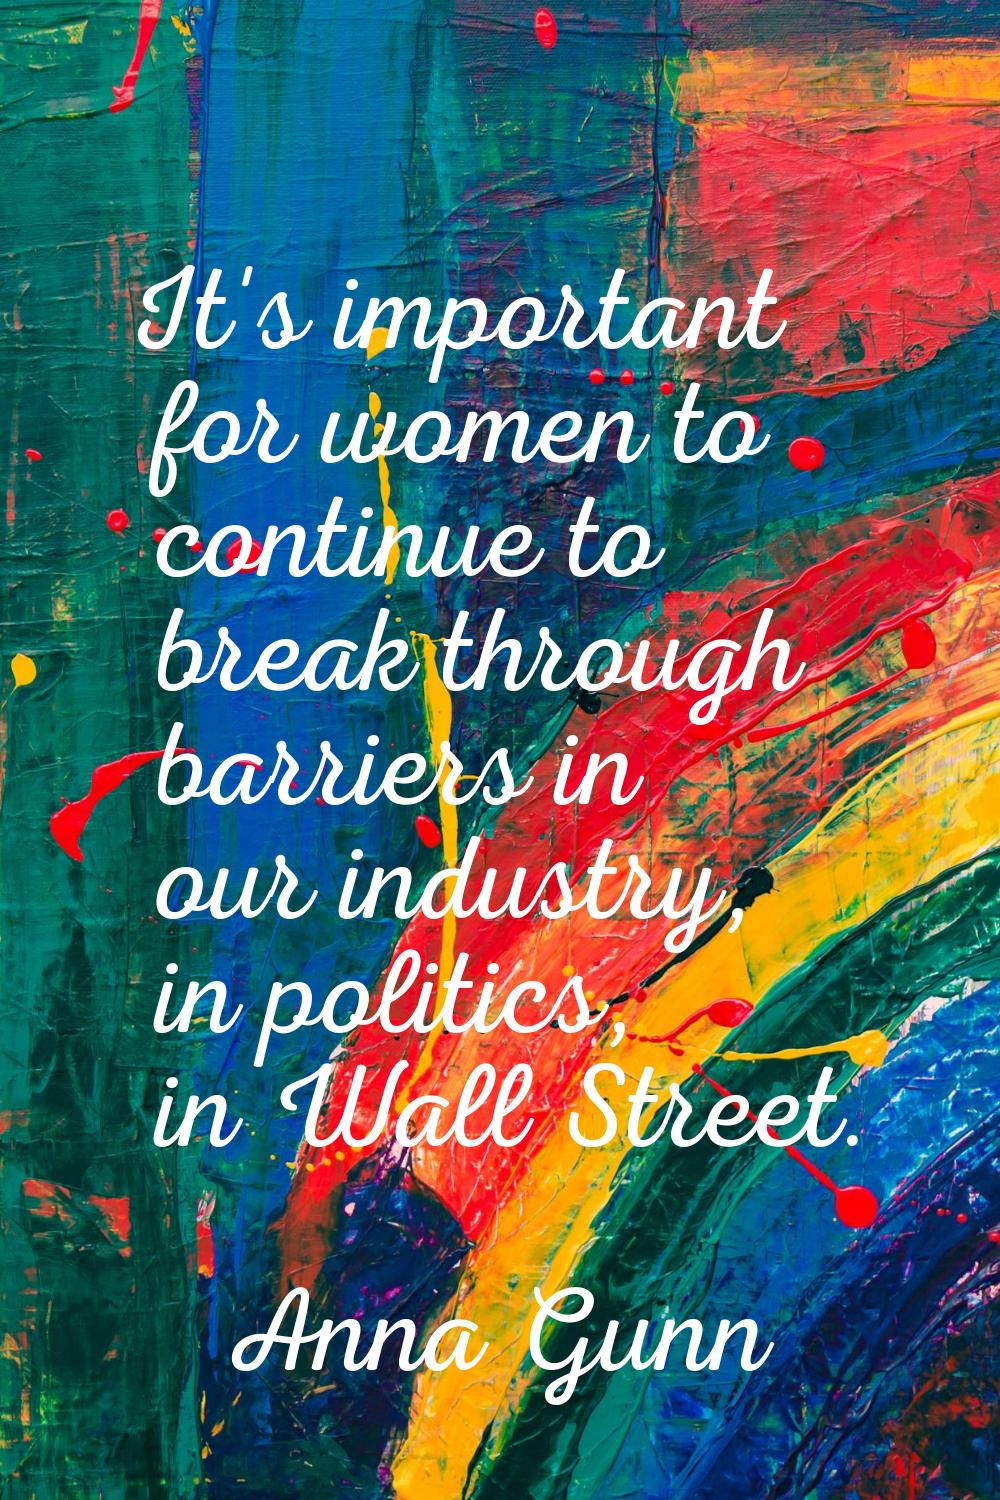 It's important for women to continue to break through barriers in our industry, in politics, in Wal